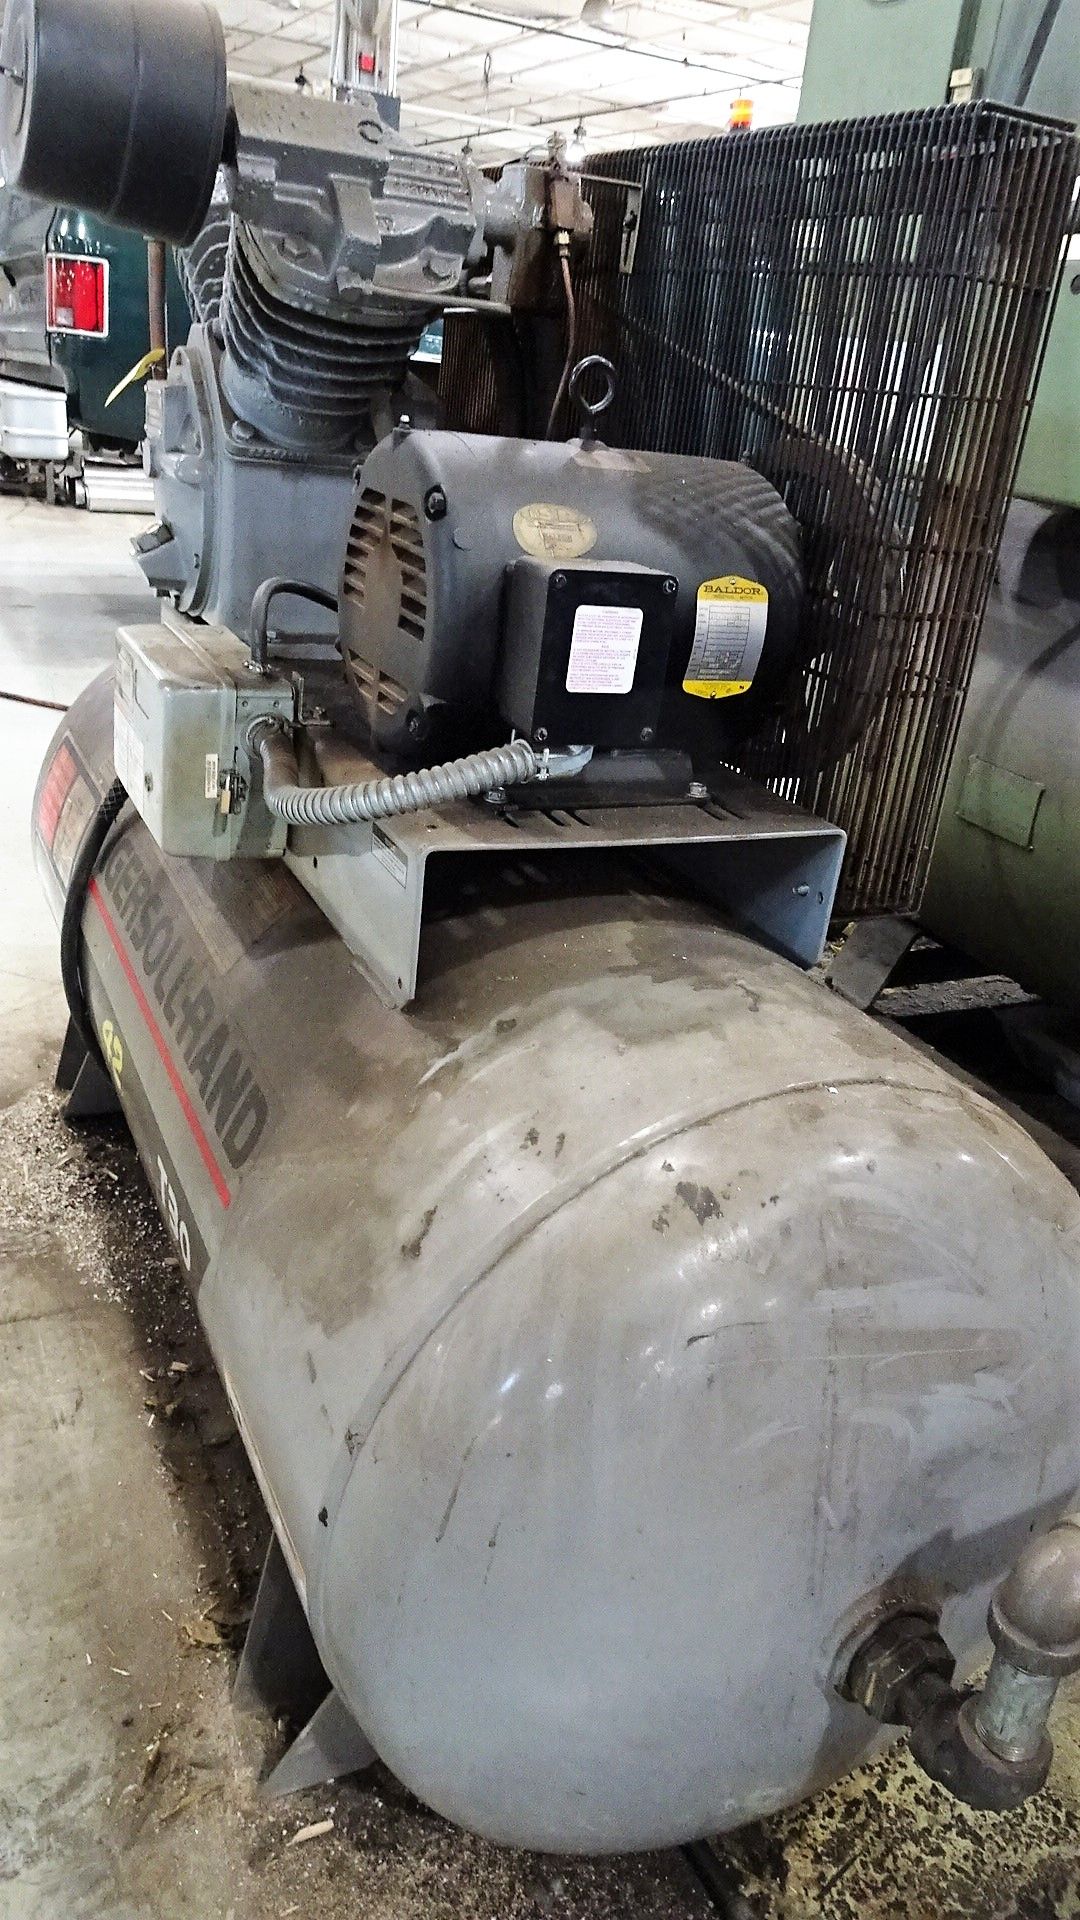 INGERSOLL-RAND MDL. T30-2545E10V 10 HP TWIN PISTON HORIZONTAL AIR COMPRESSOR WITH APPROXIMATELY - Image 2 of 3